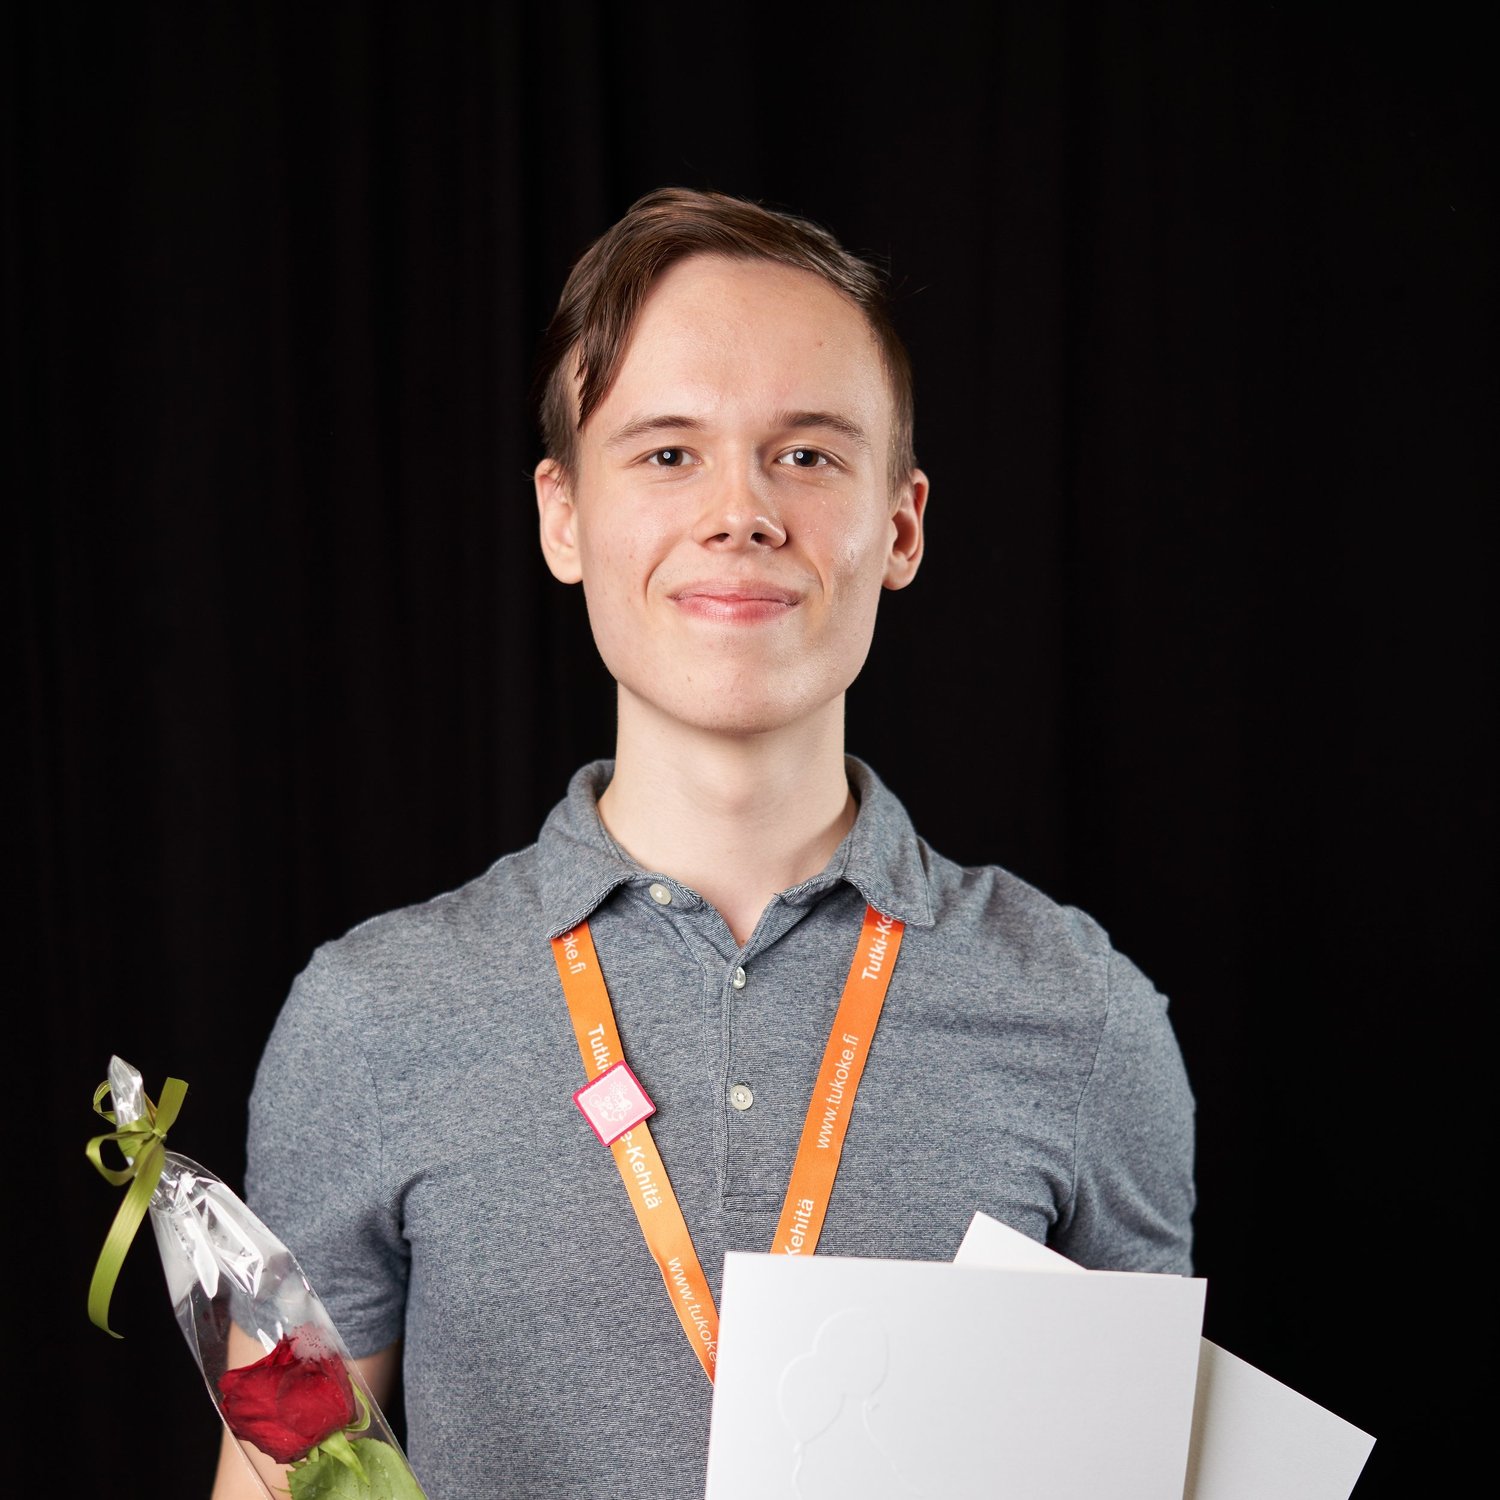 Me with certificates for winning the Finnish national Tutki-Kokeile-Kehitä science competition